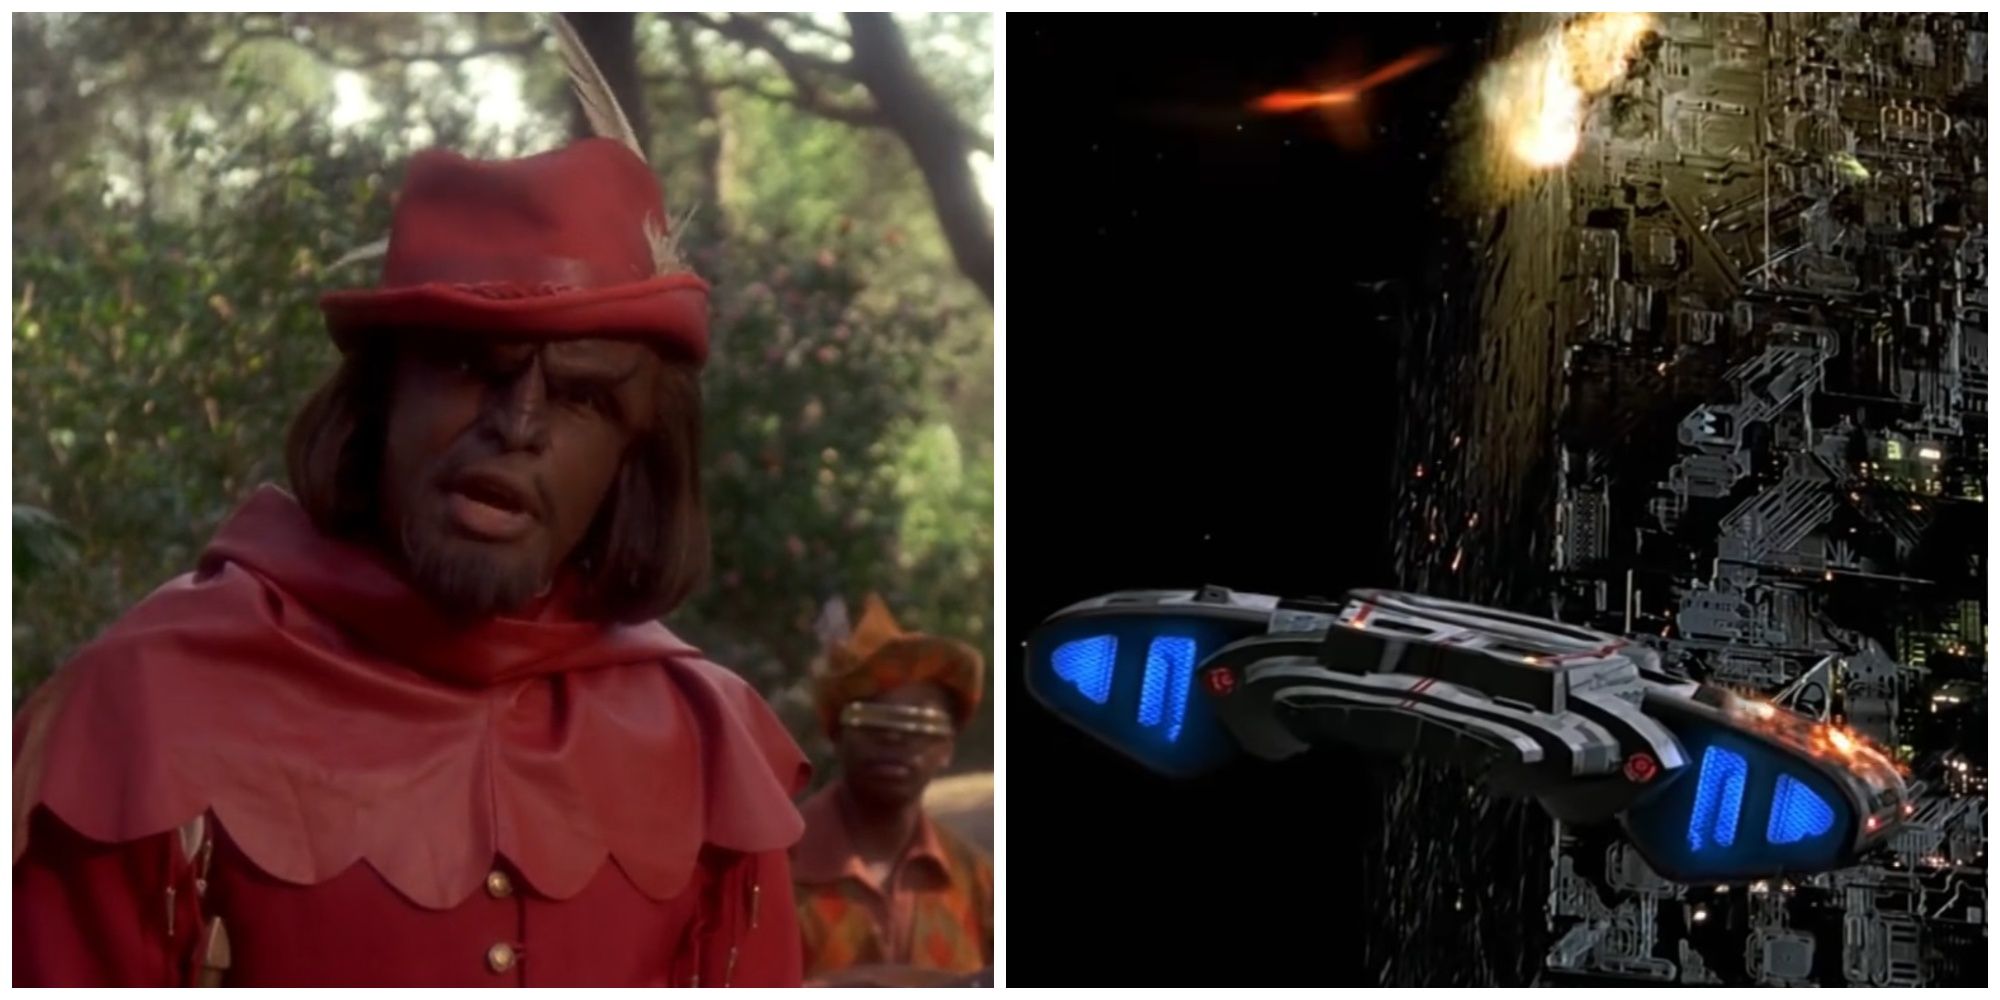 Split image showing Worf dressed as a merry man and the USS Defiant.